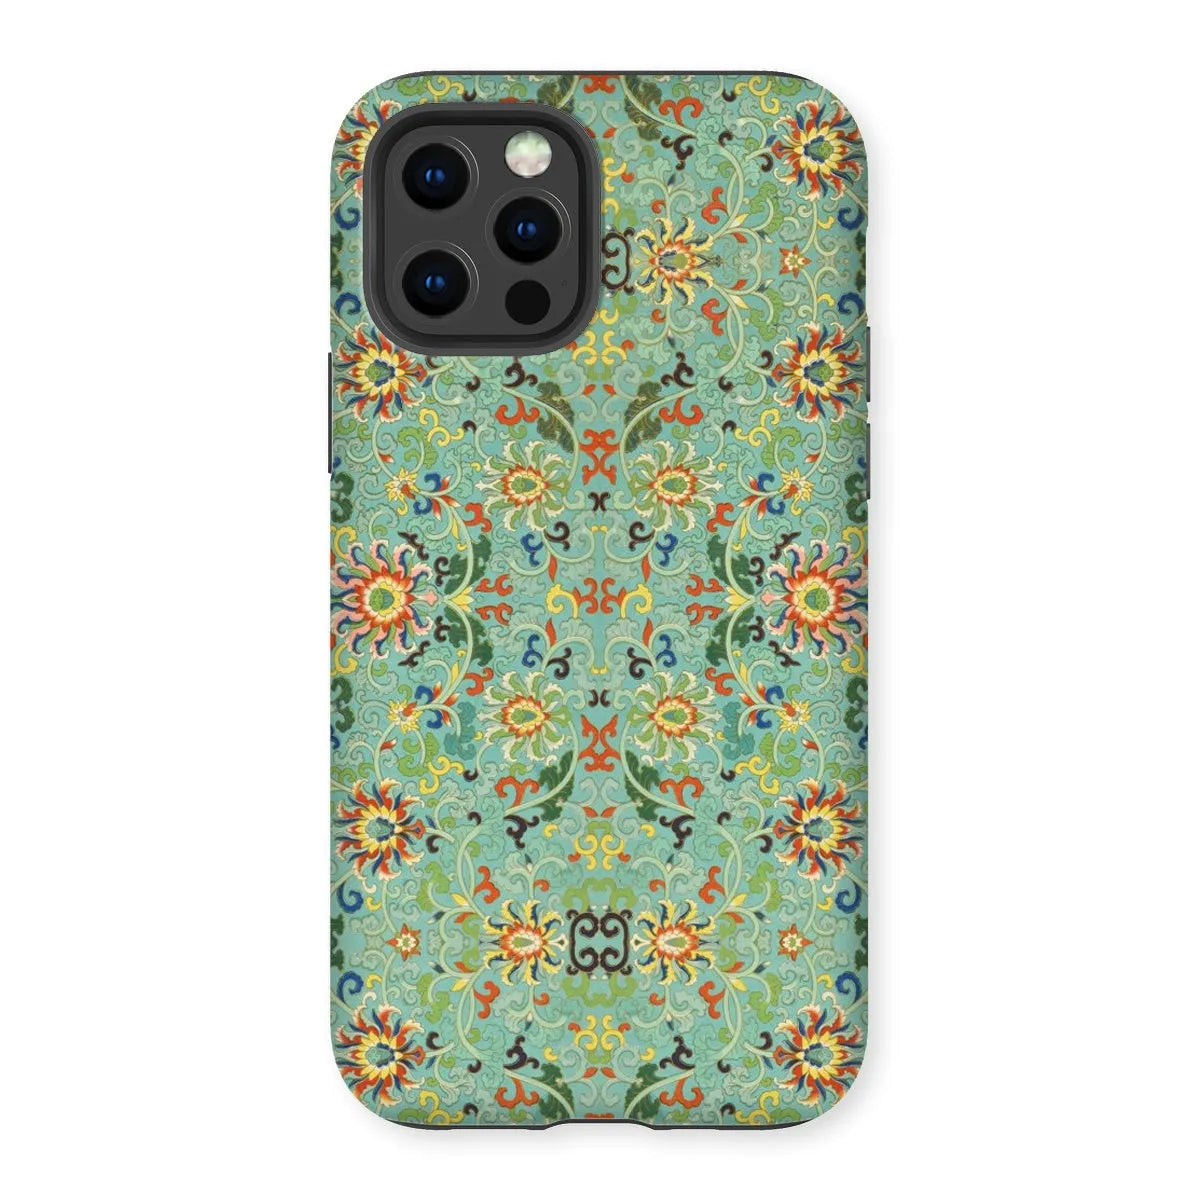 Lotus Candy - Chinese Aesthetic Pattern Art Phone Case - Iphone 12 Pro / Matte - Mobile Phone Cases - Aesthetic Art